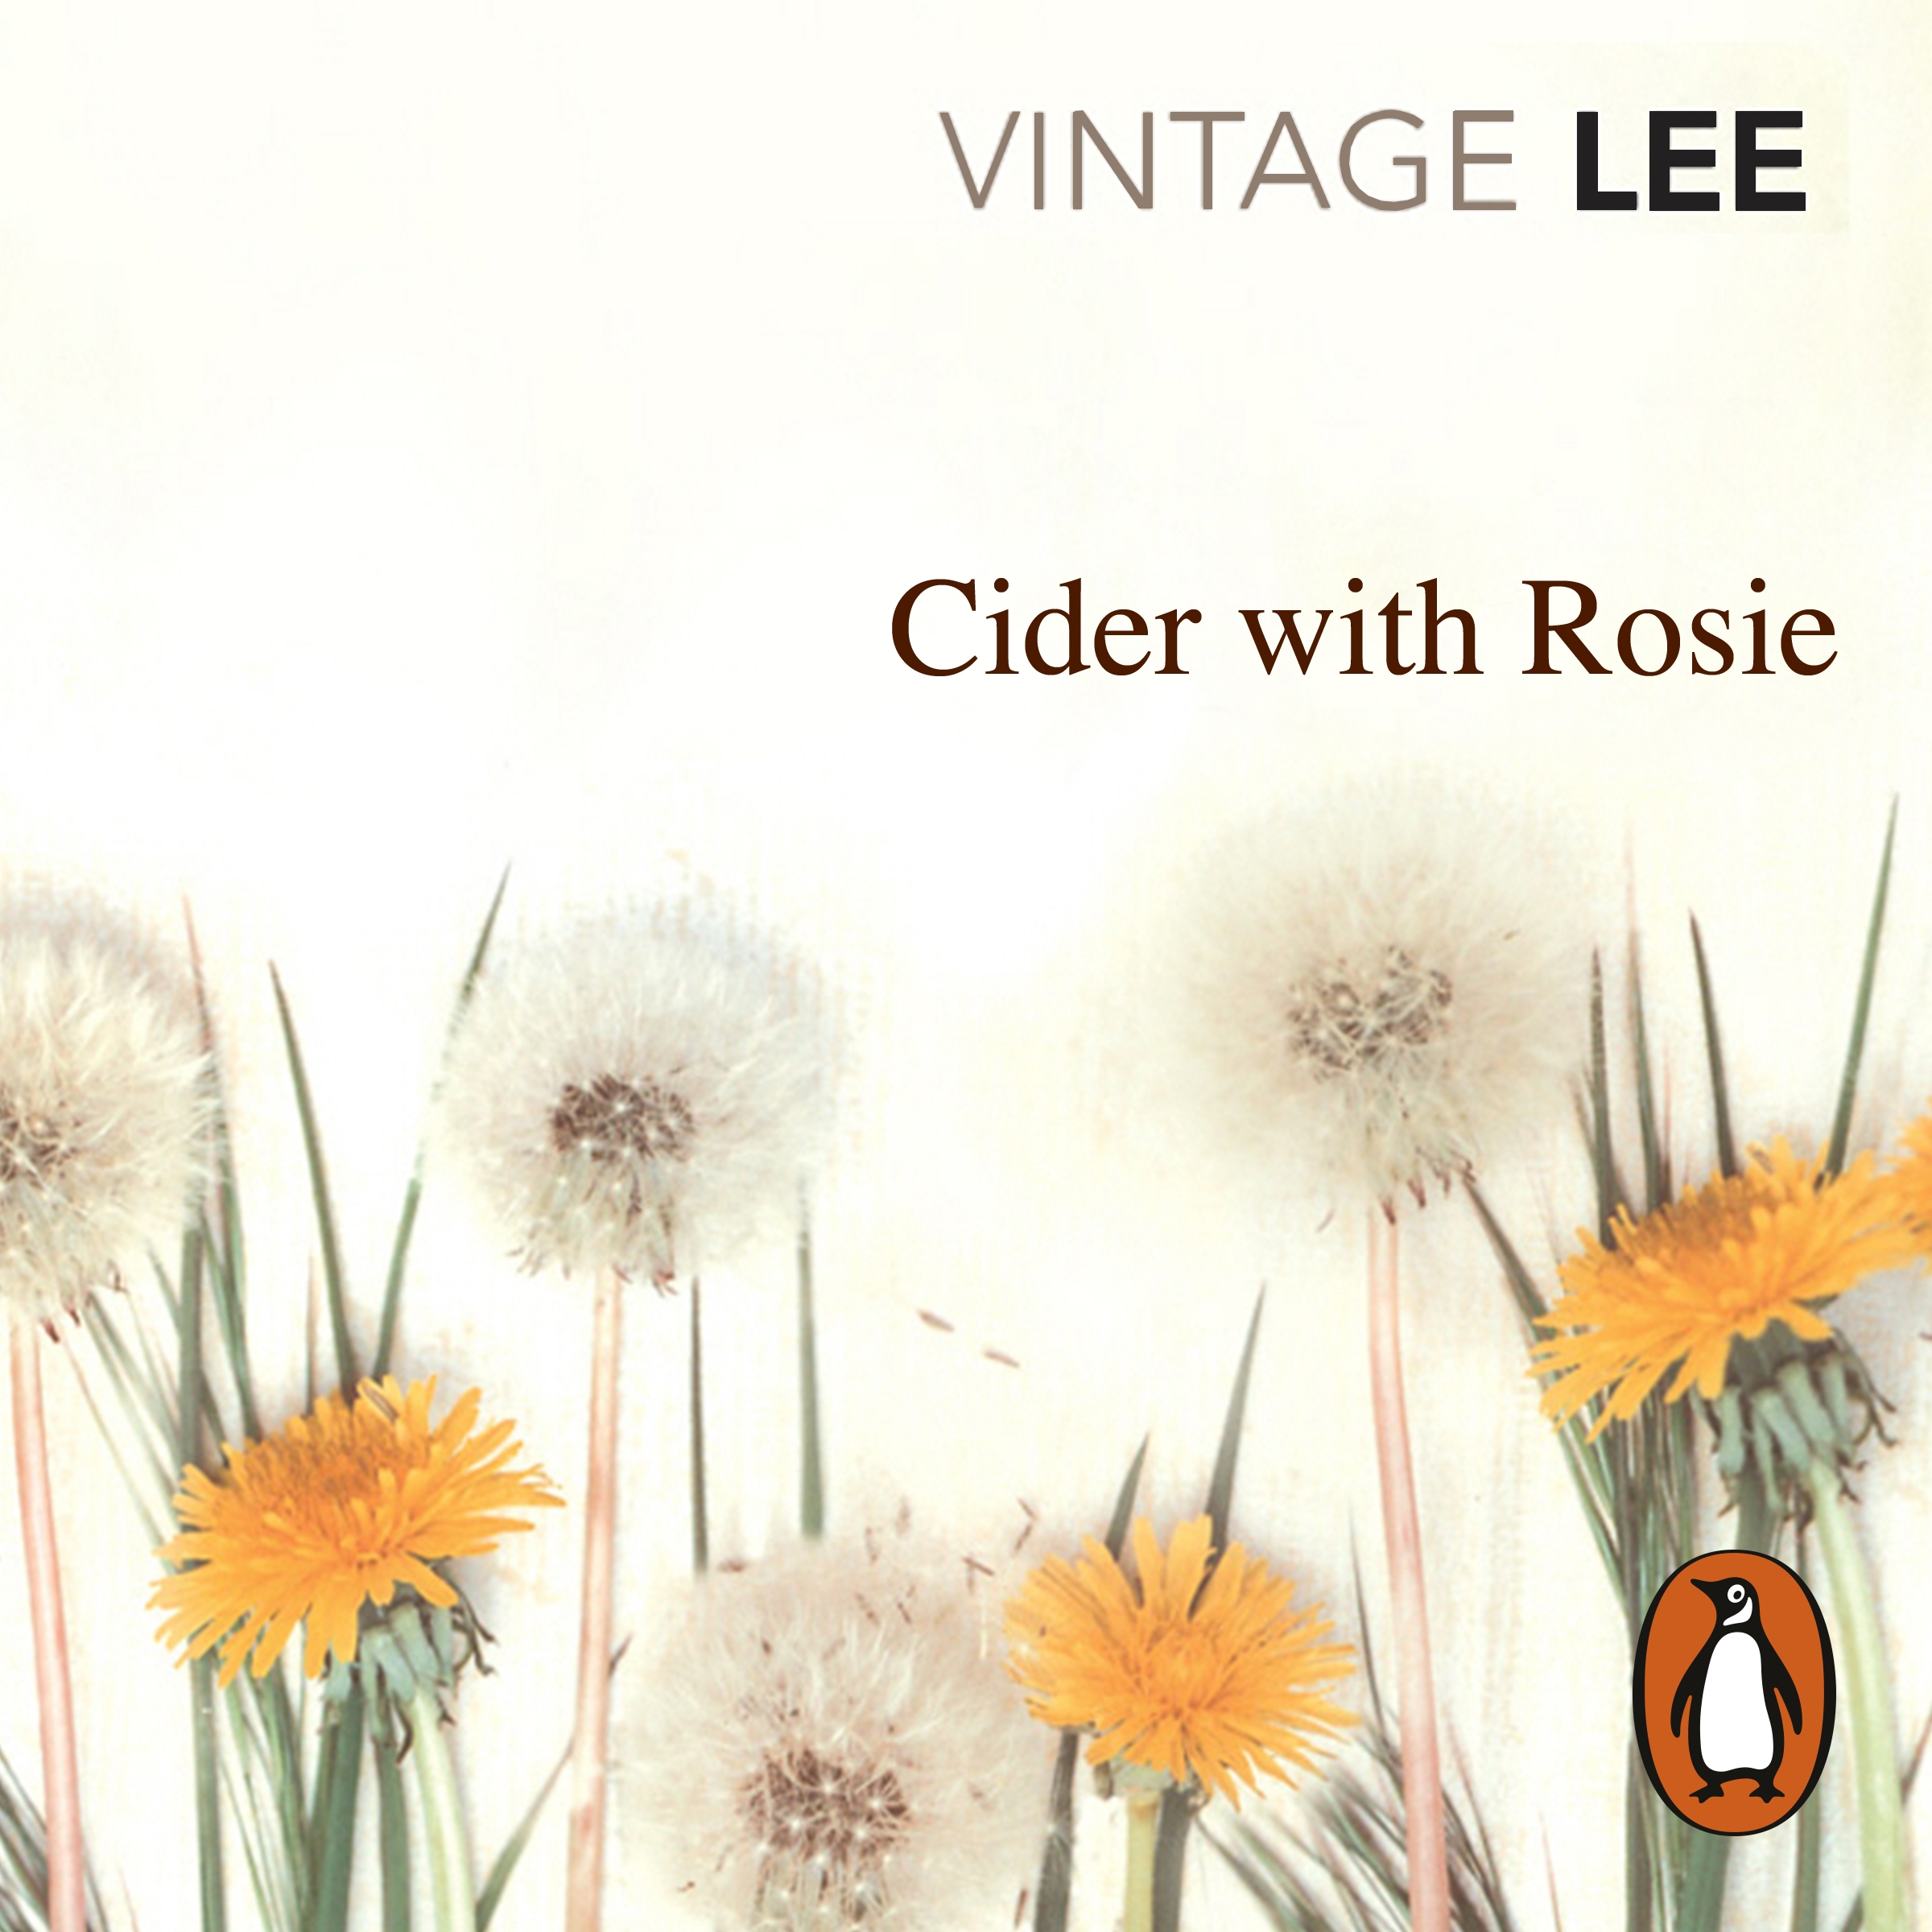 Cider with Rosie by Laurie Lee